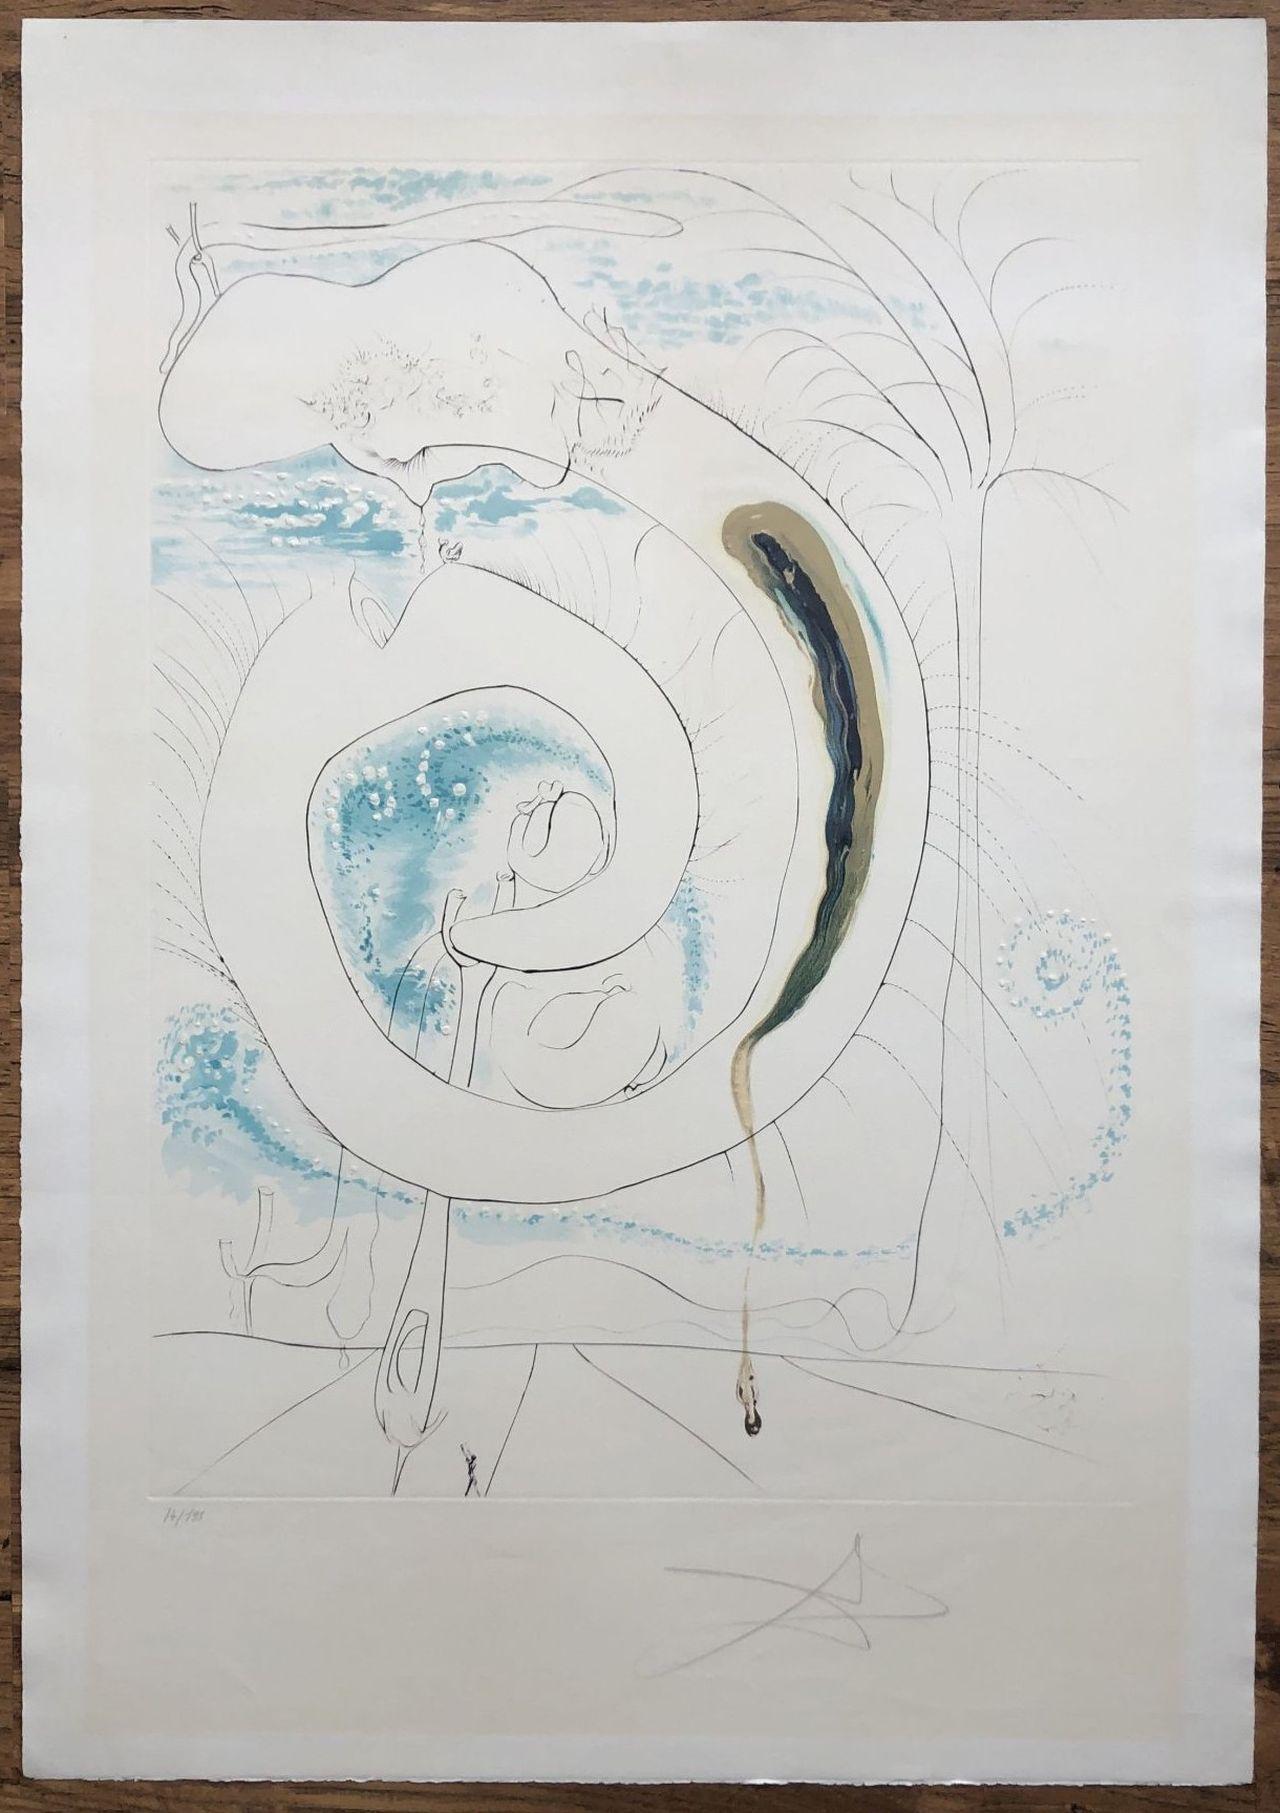 The Visceral Circle of the Cosmos - Original Etching Handsigned 